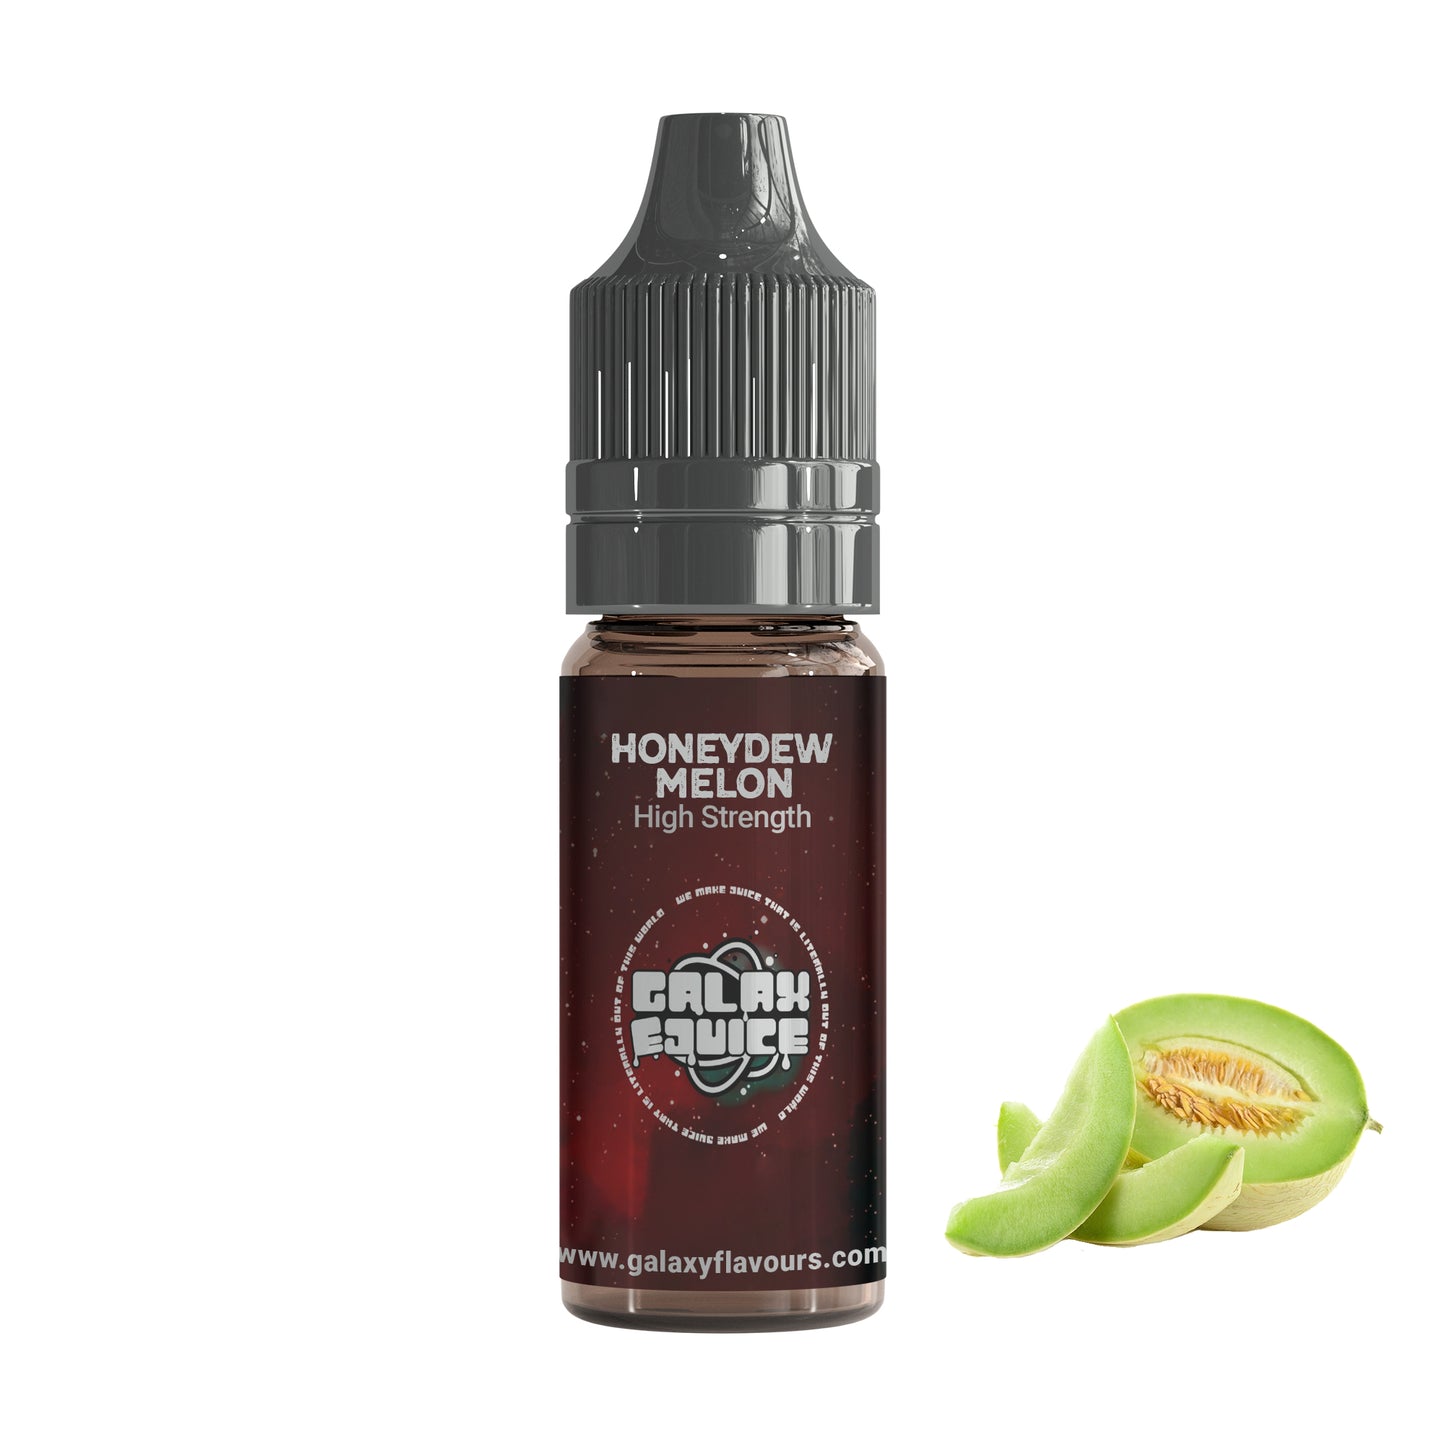 Honeydew Melon High Strength Professional Flavouring.